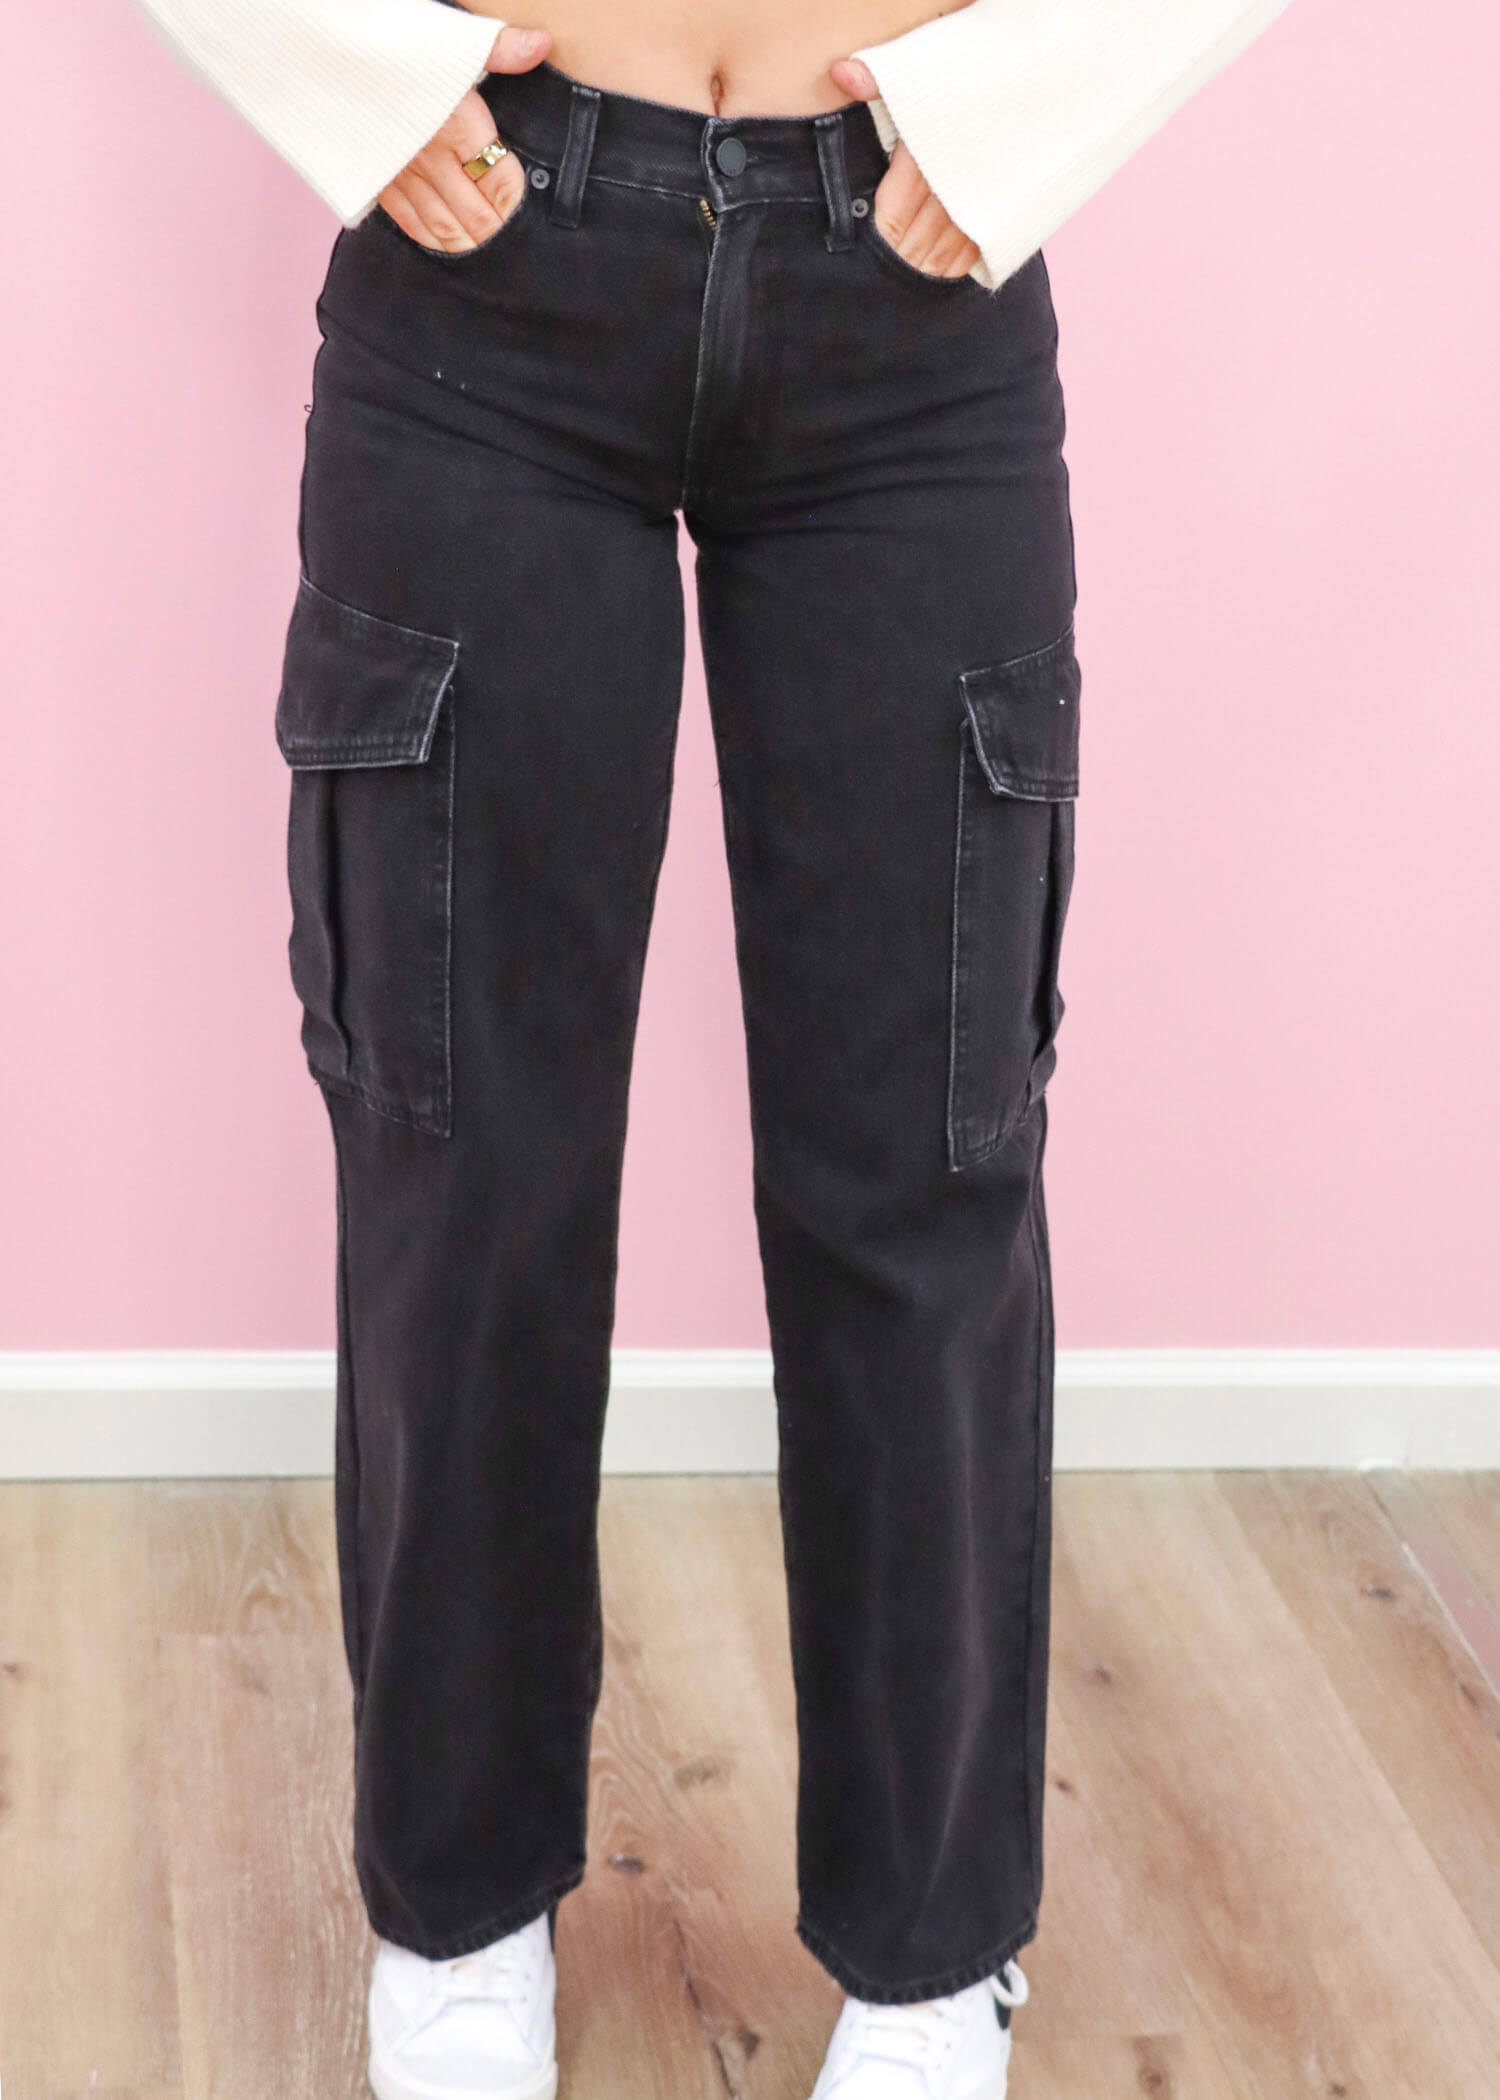 Find You Later Cargo Jeans - Black